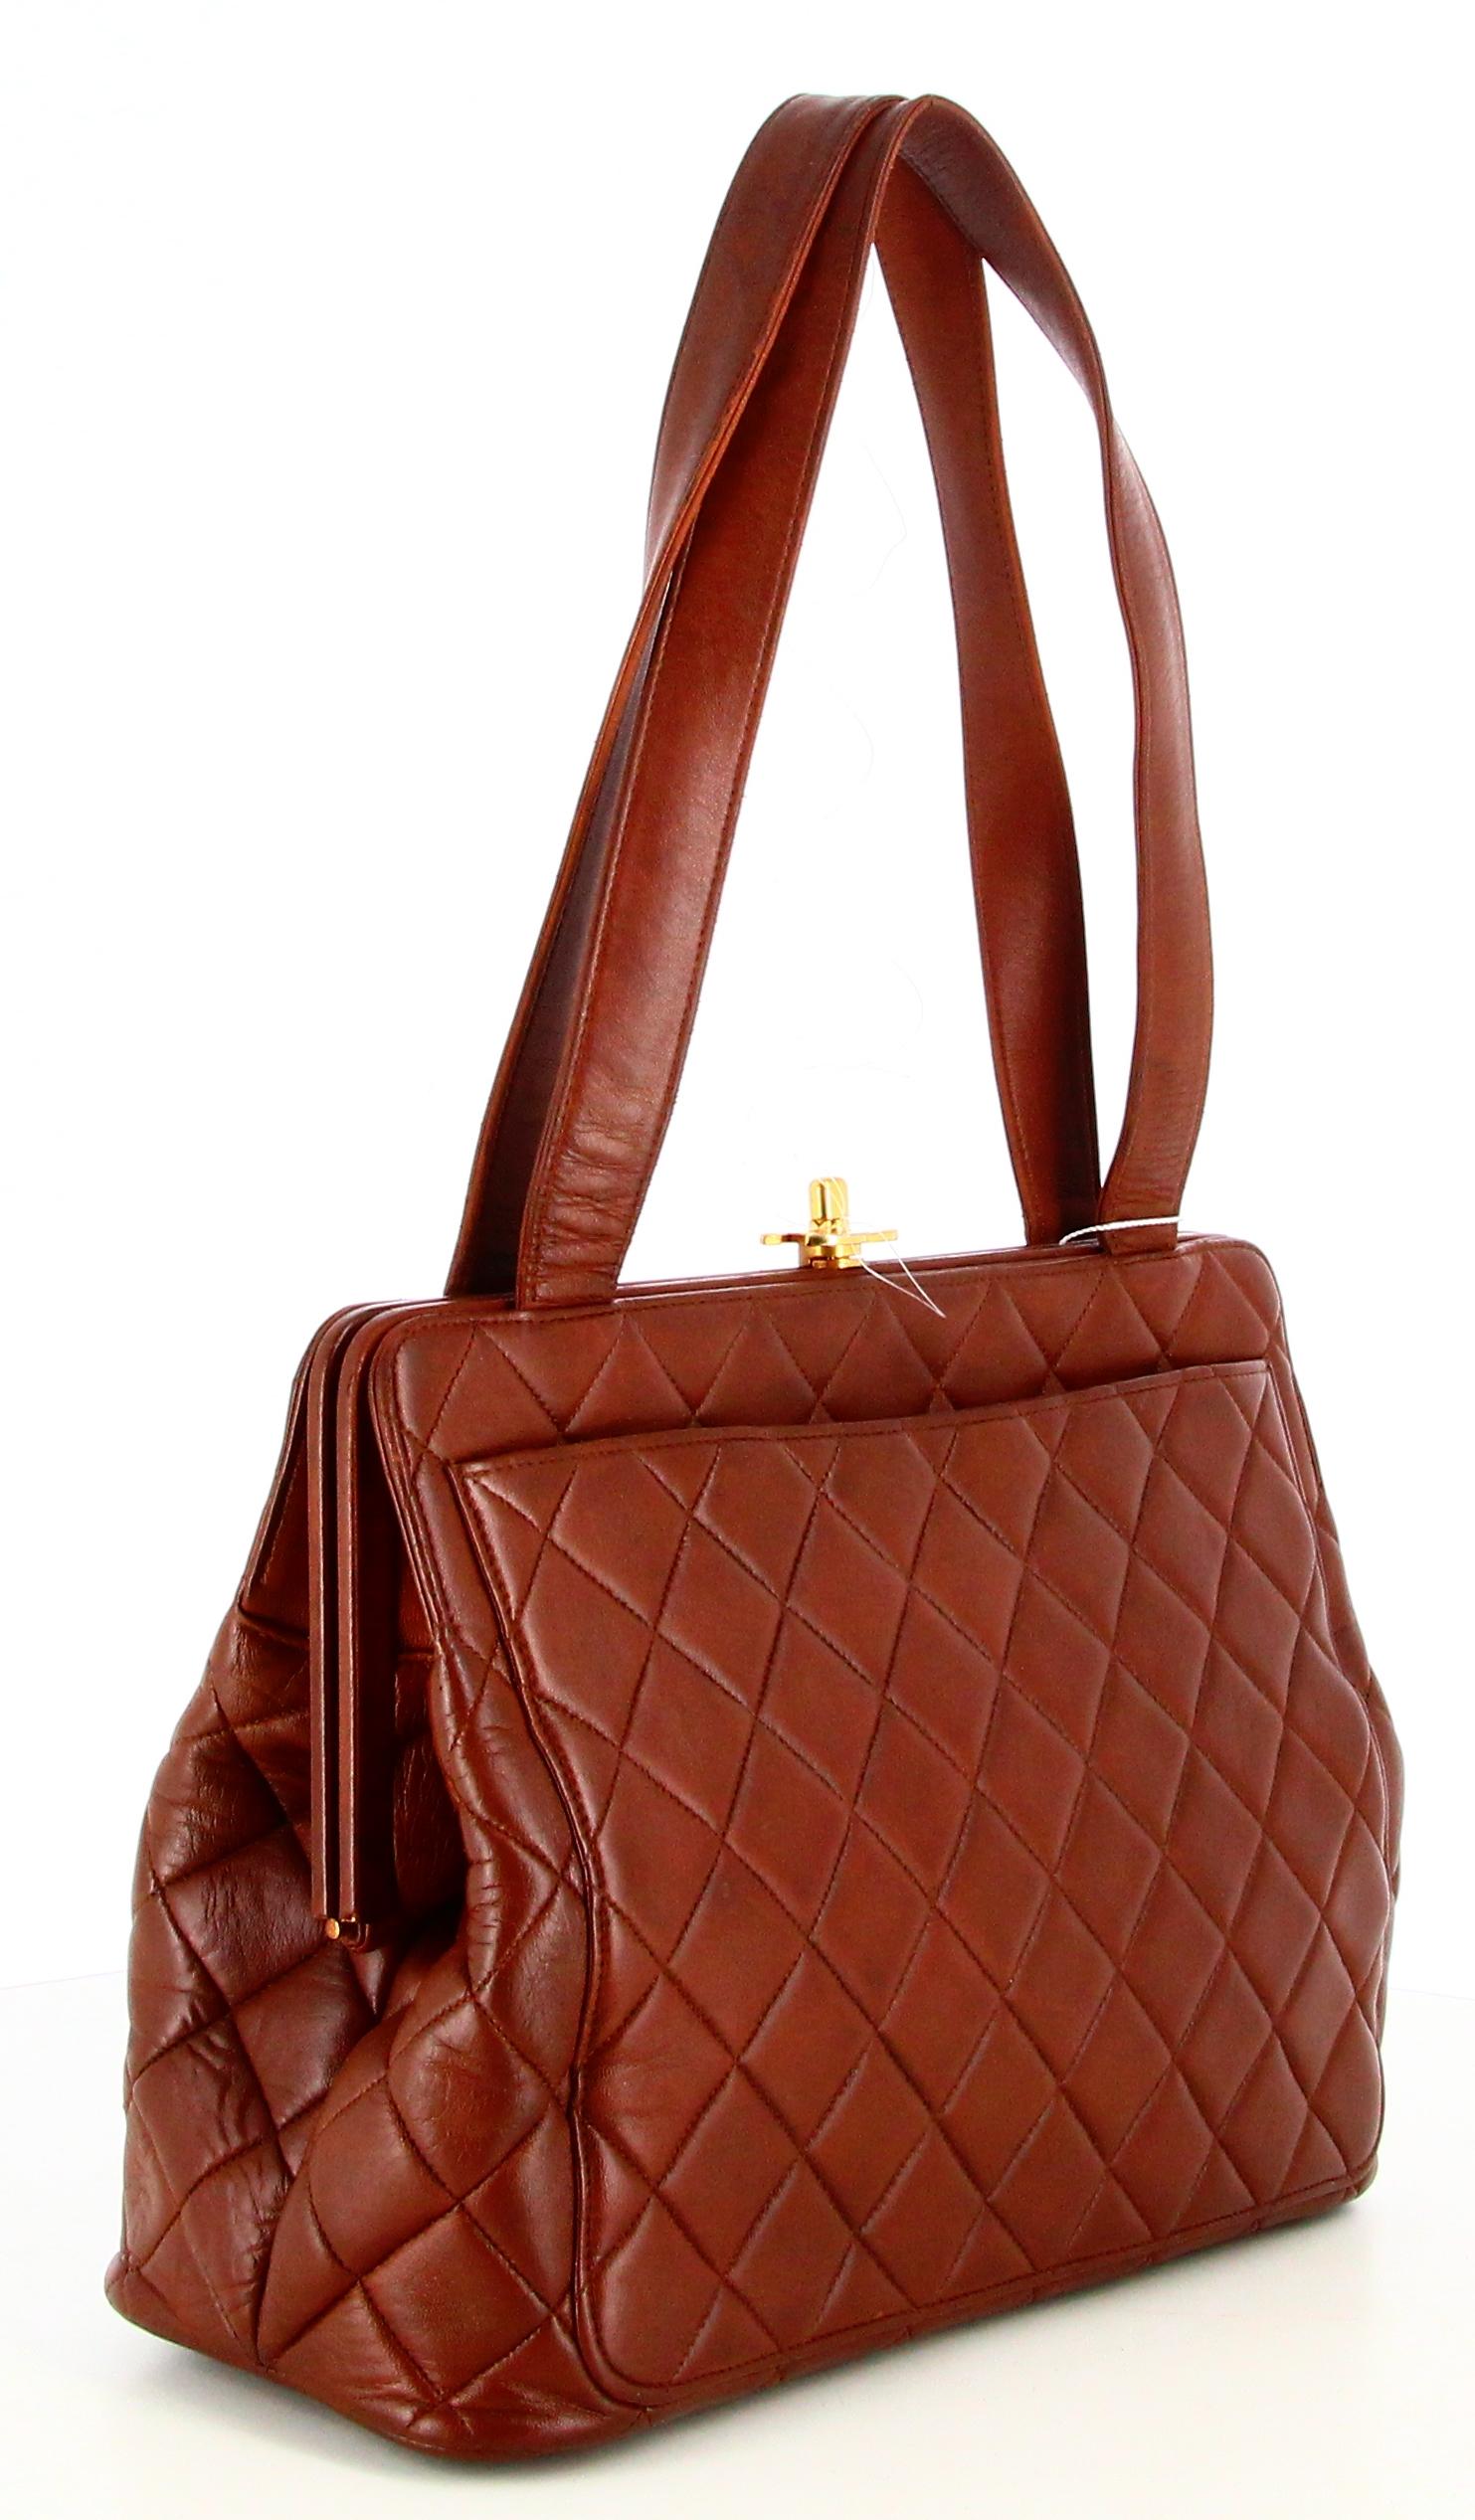 1996 Chanel Handbag Brown Quilted leather For Sale 1